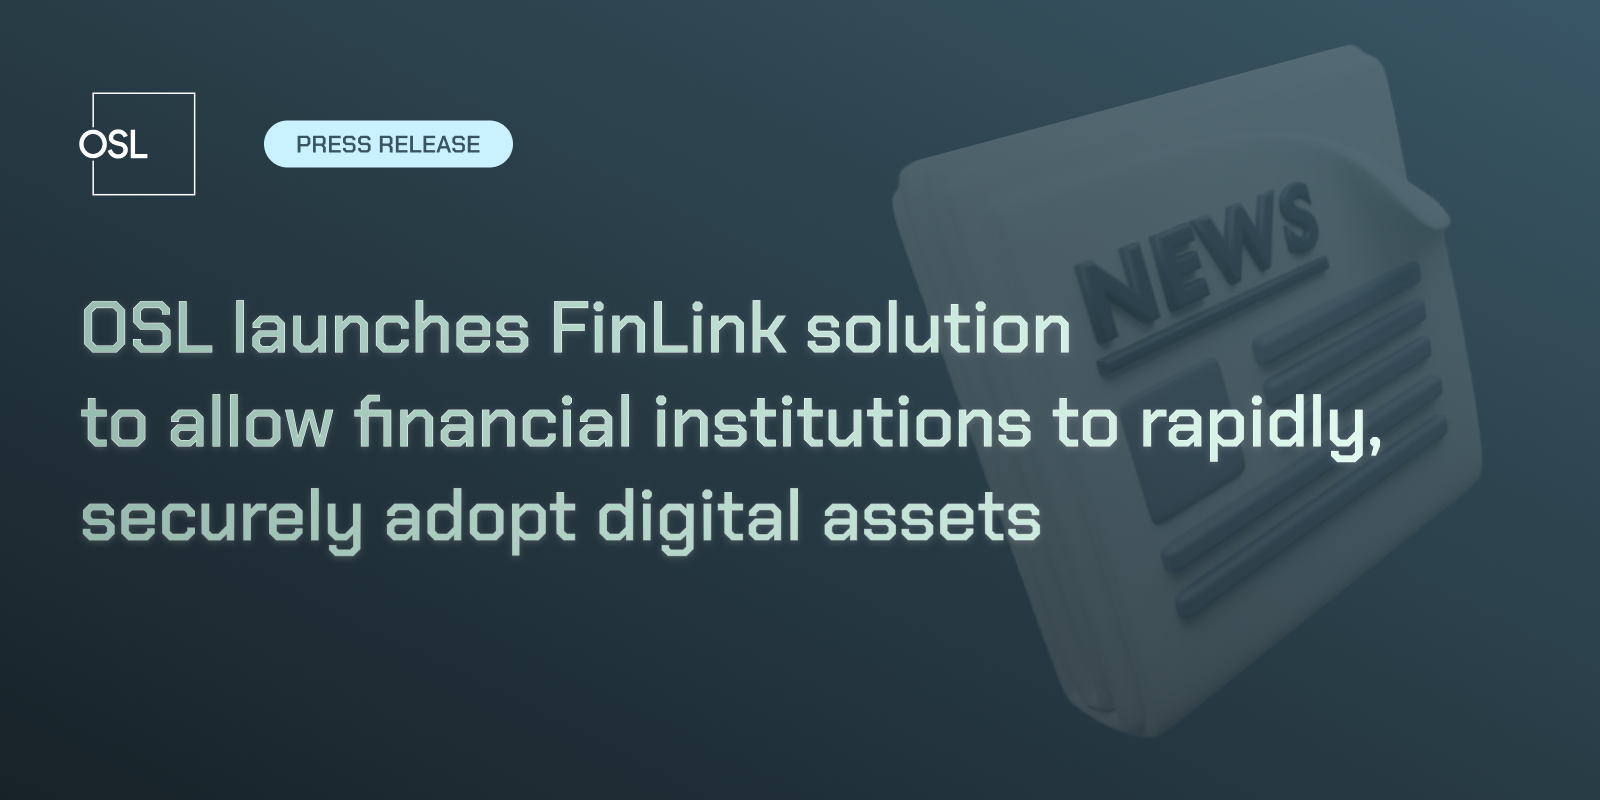 OSL launches FinLink solution to allow financial institutions to rapidly, securely adopt digital assets